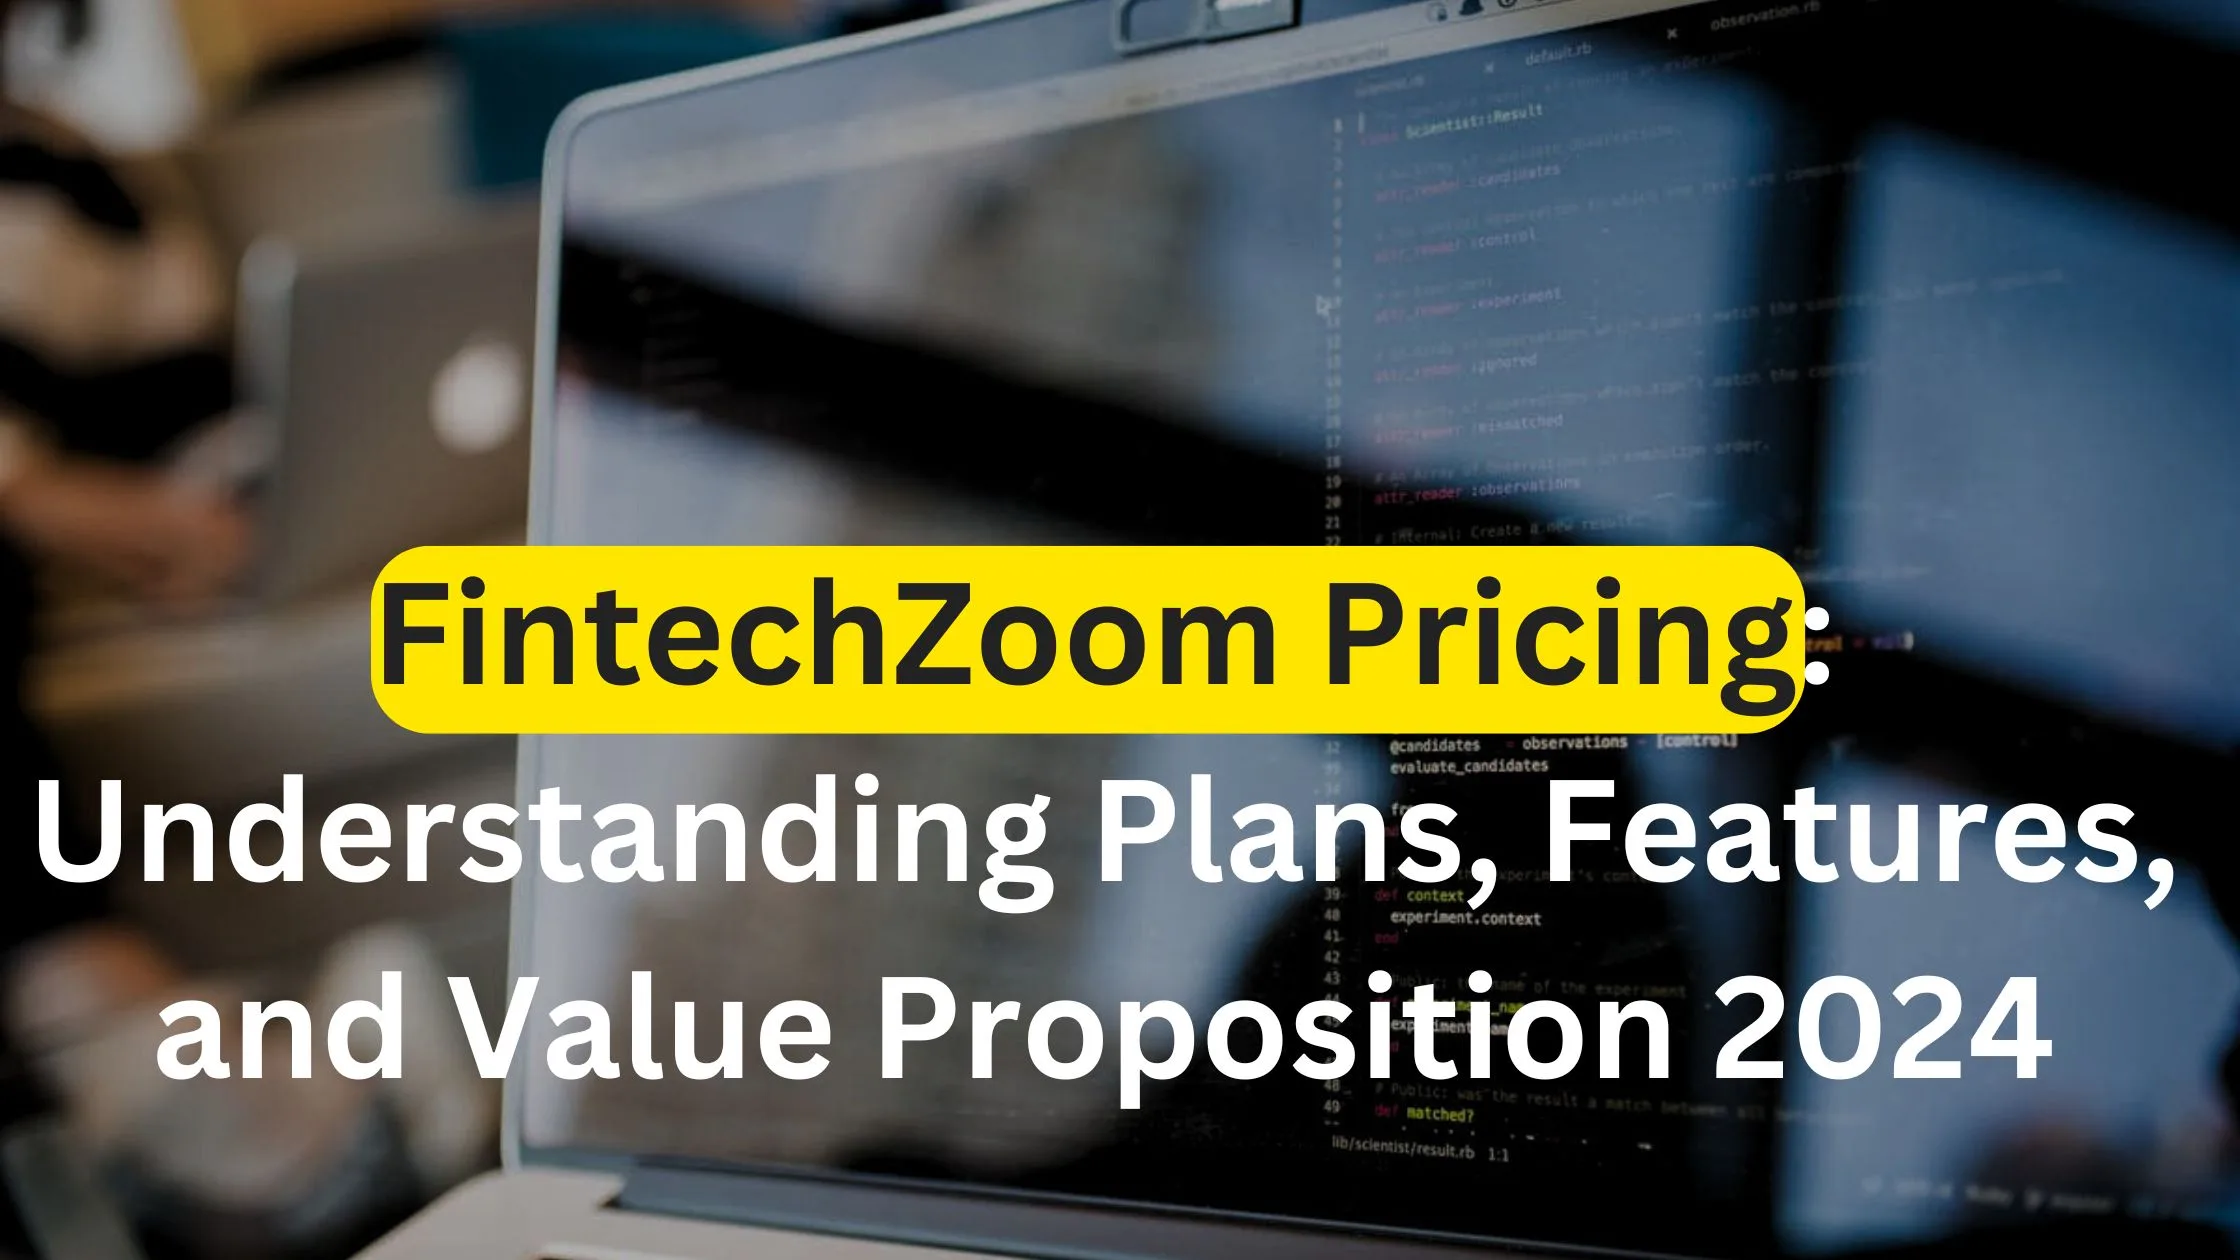 FintechZoom Pricing: Understanding Plans, Features, and Value Proposition 2024